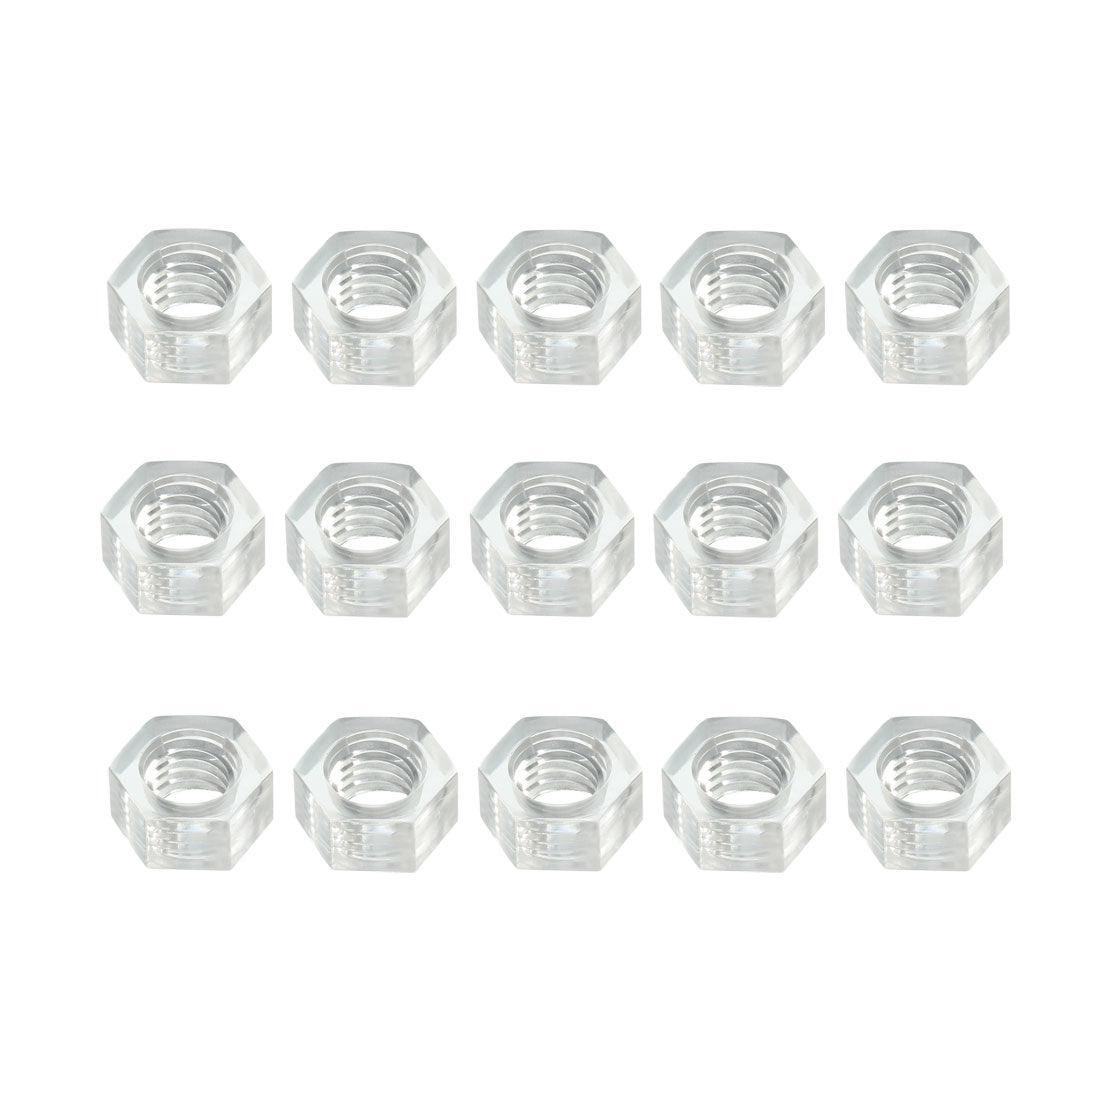 uxcell Uxcell Hex Nut, Metric  Acrylic M6x1mm Thread Hexagon Nuts Clear 15pcs